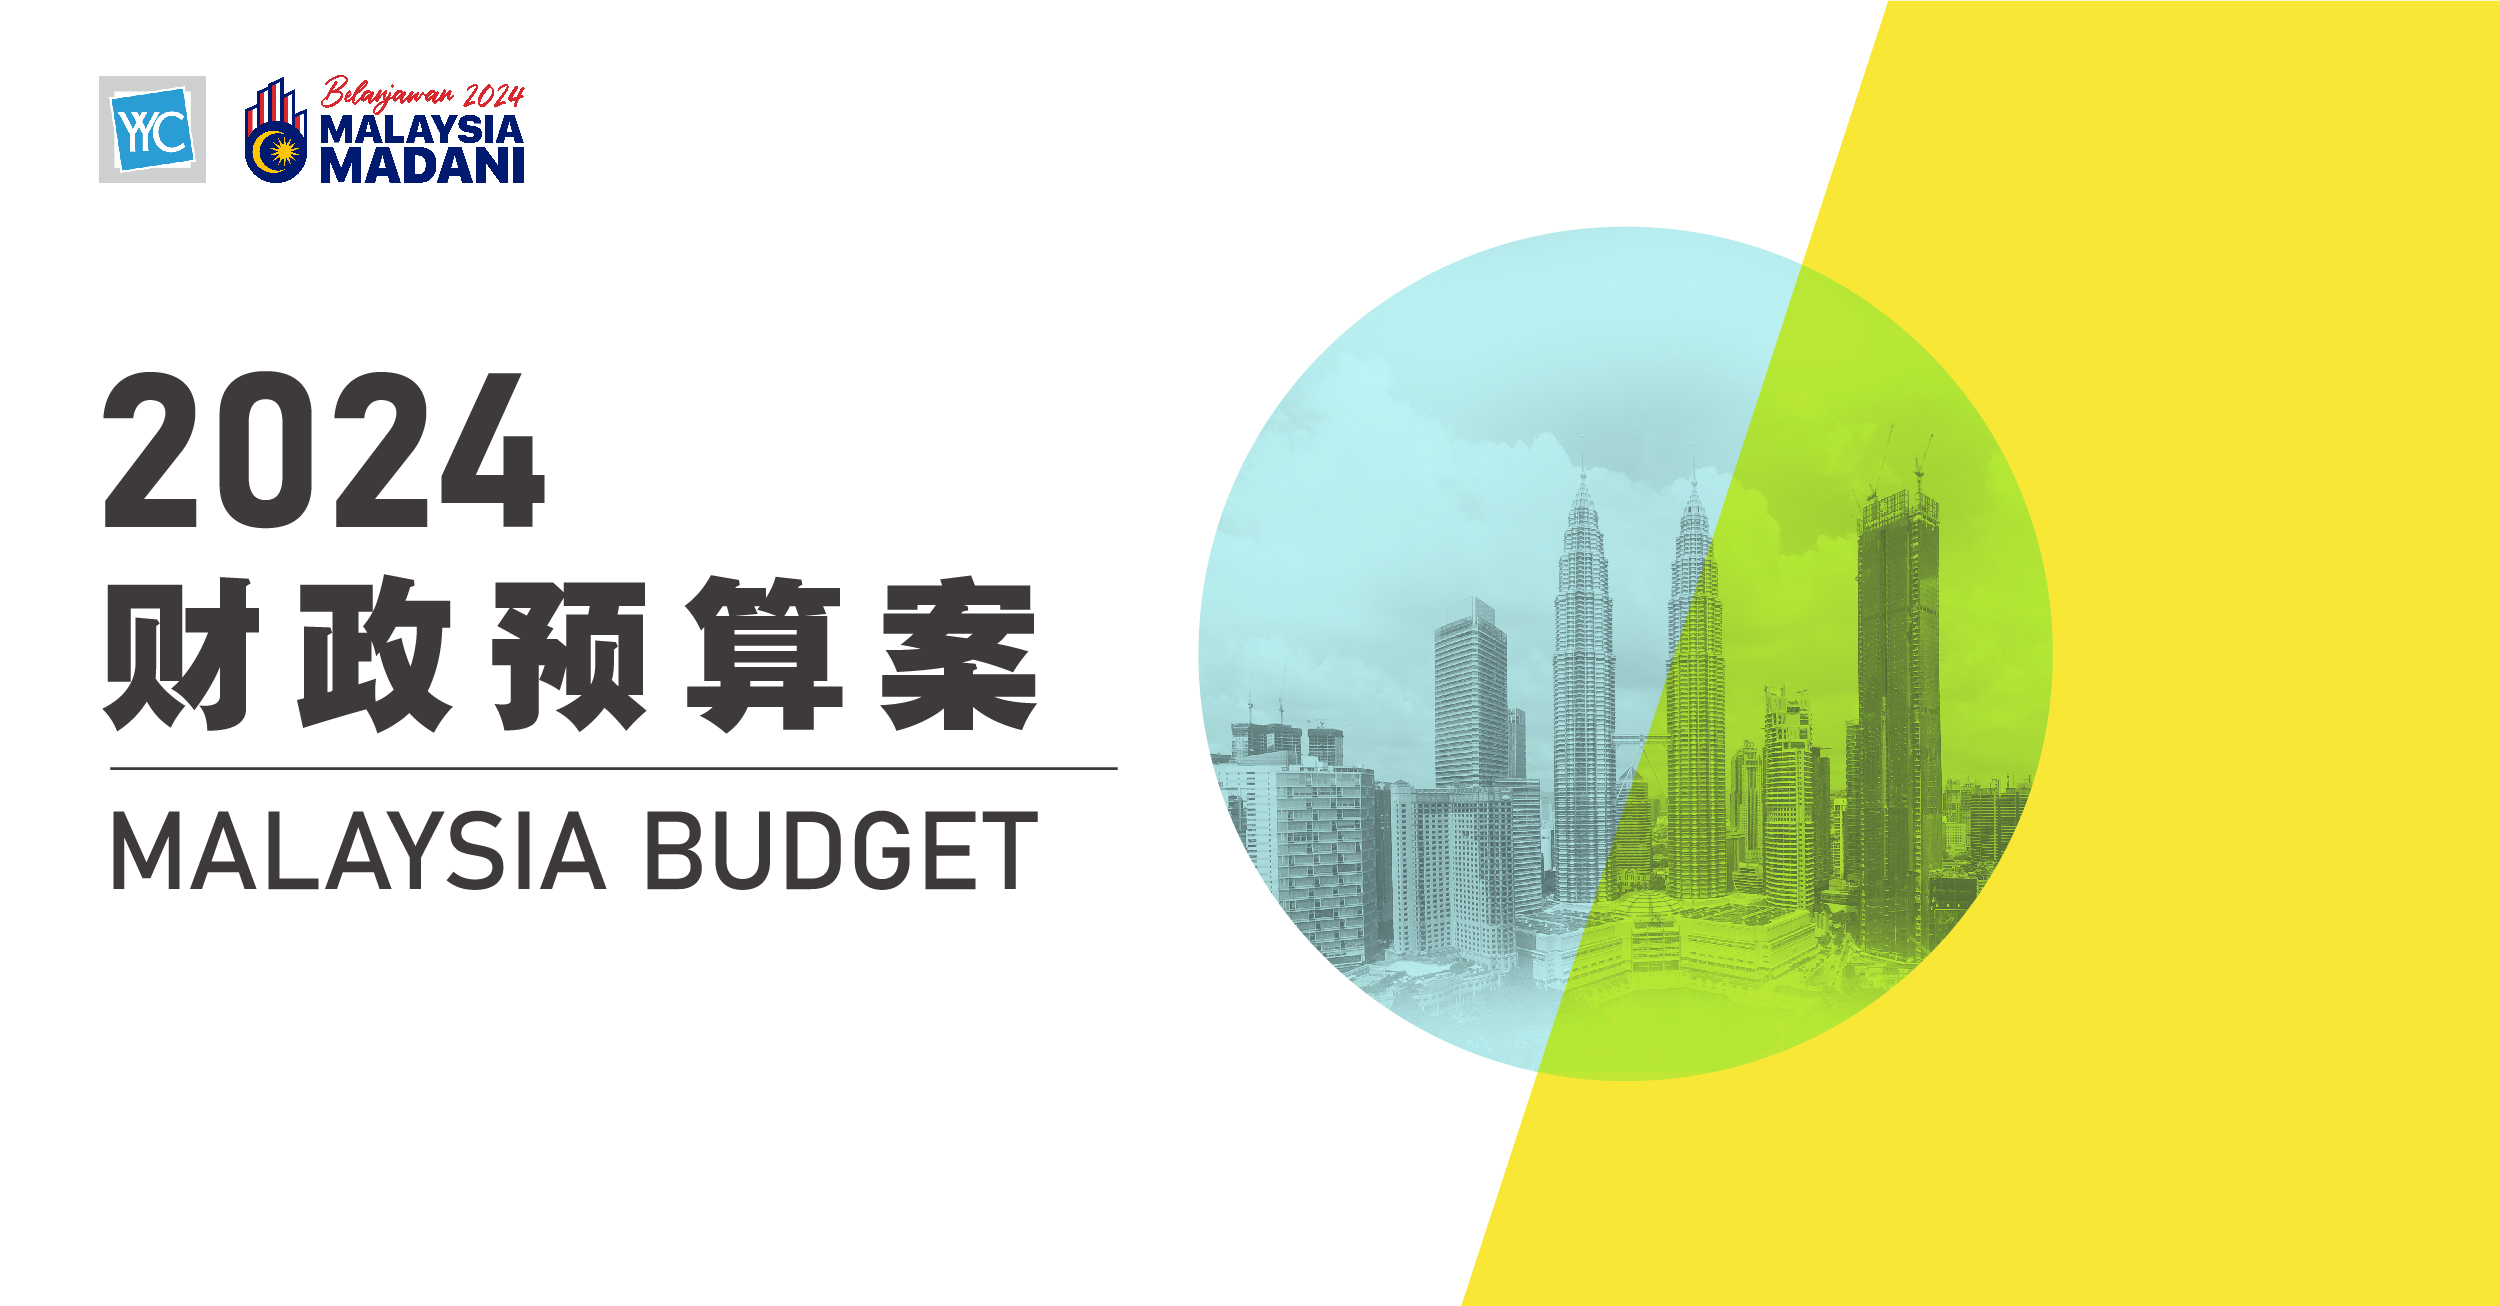 The government on Friday announced an RM393.8 billion expansionary Budget for 2024. The national Budget comprises RM303.8 billion in operating expenditure